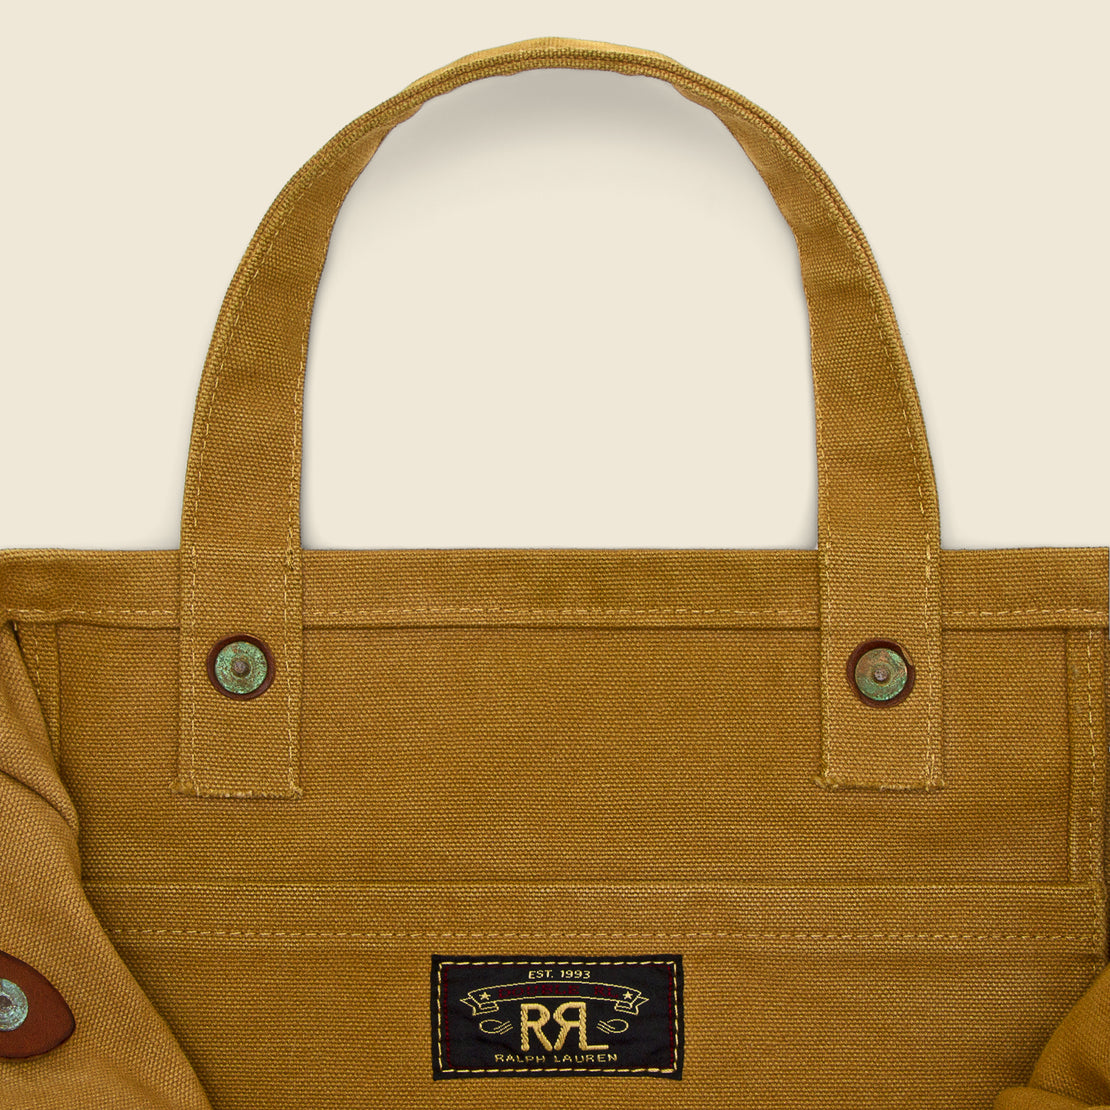 Carpenter Tote Bag - Distressed Khaki - RRL - STAG Provisions - Accessories - Bags / Luggage